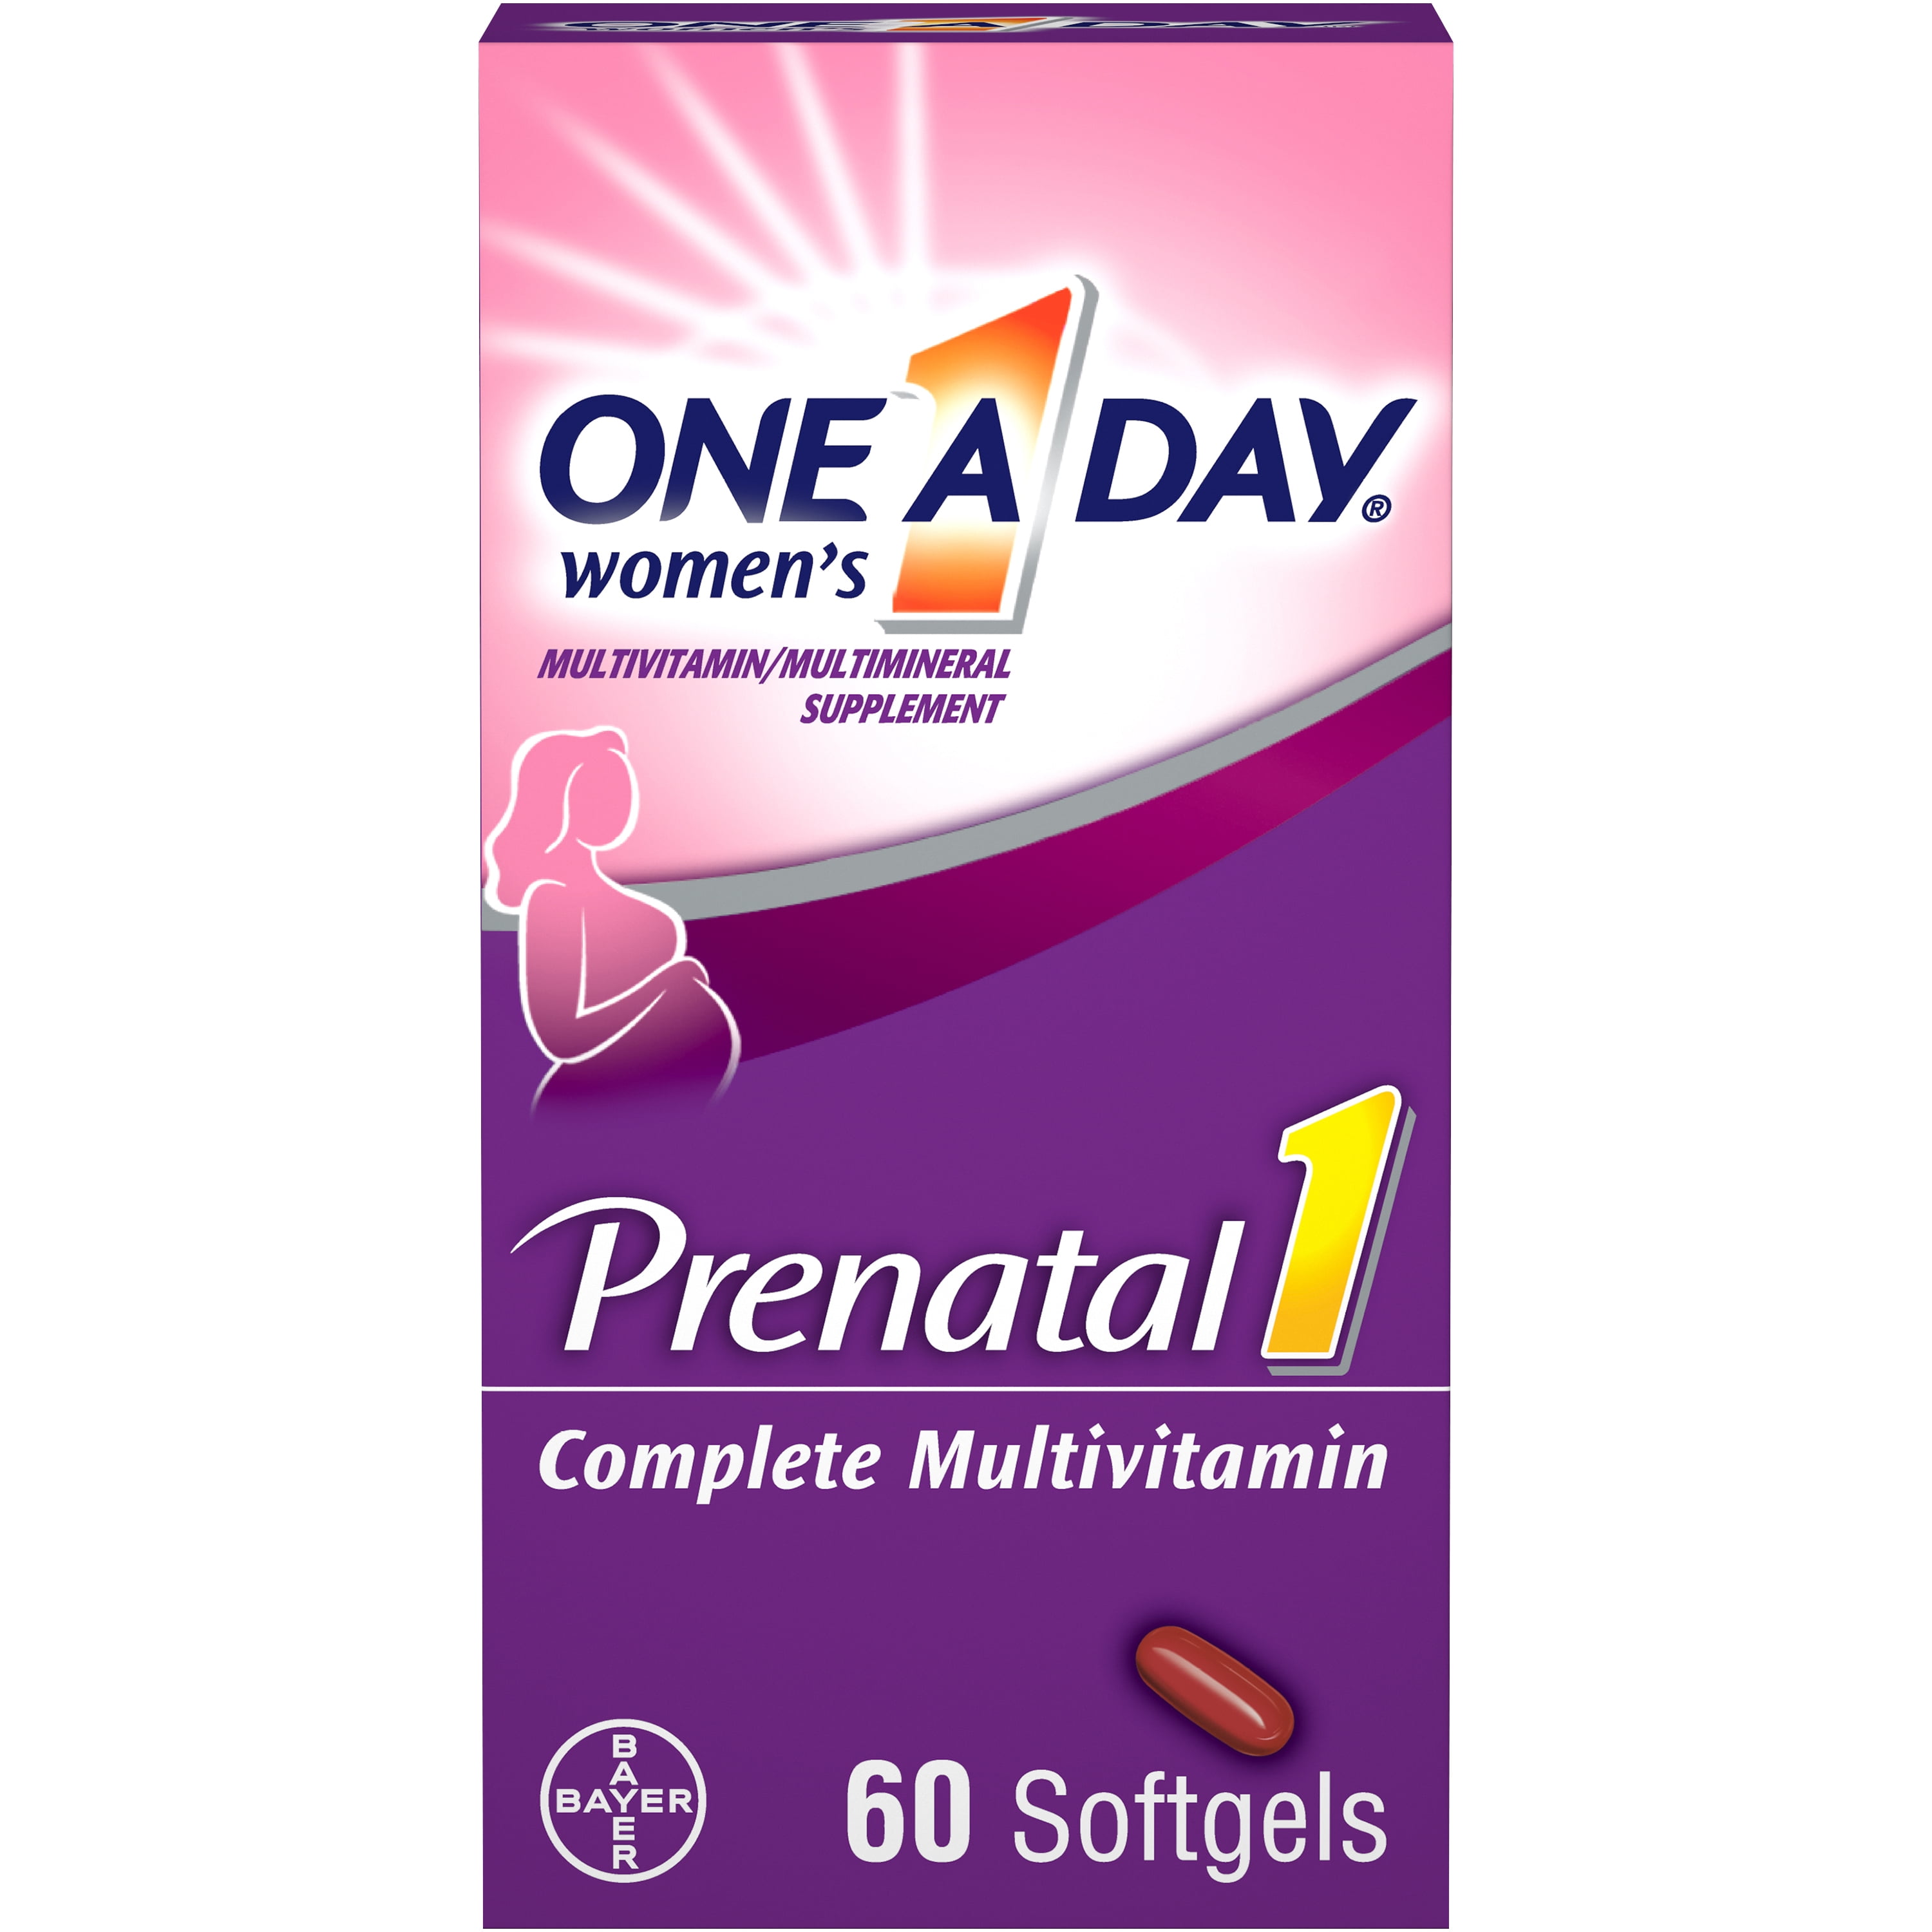 One A Day Women's Prenatal Multivitamin with Folic Acid, DHA and Iron, 60 Ct